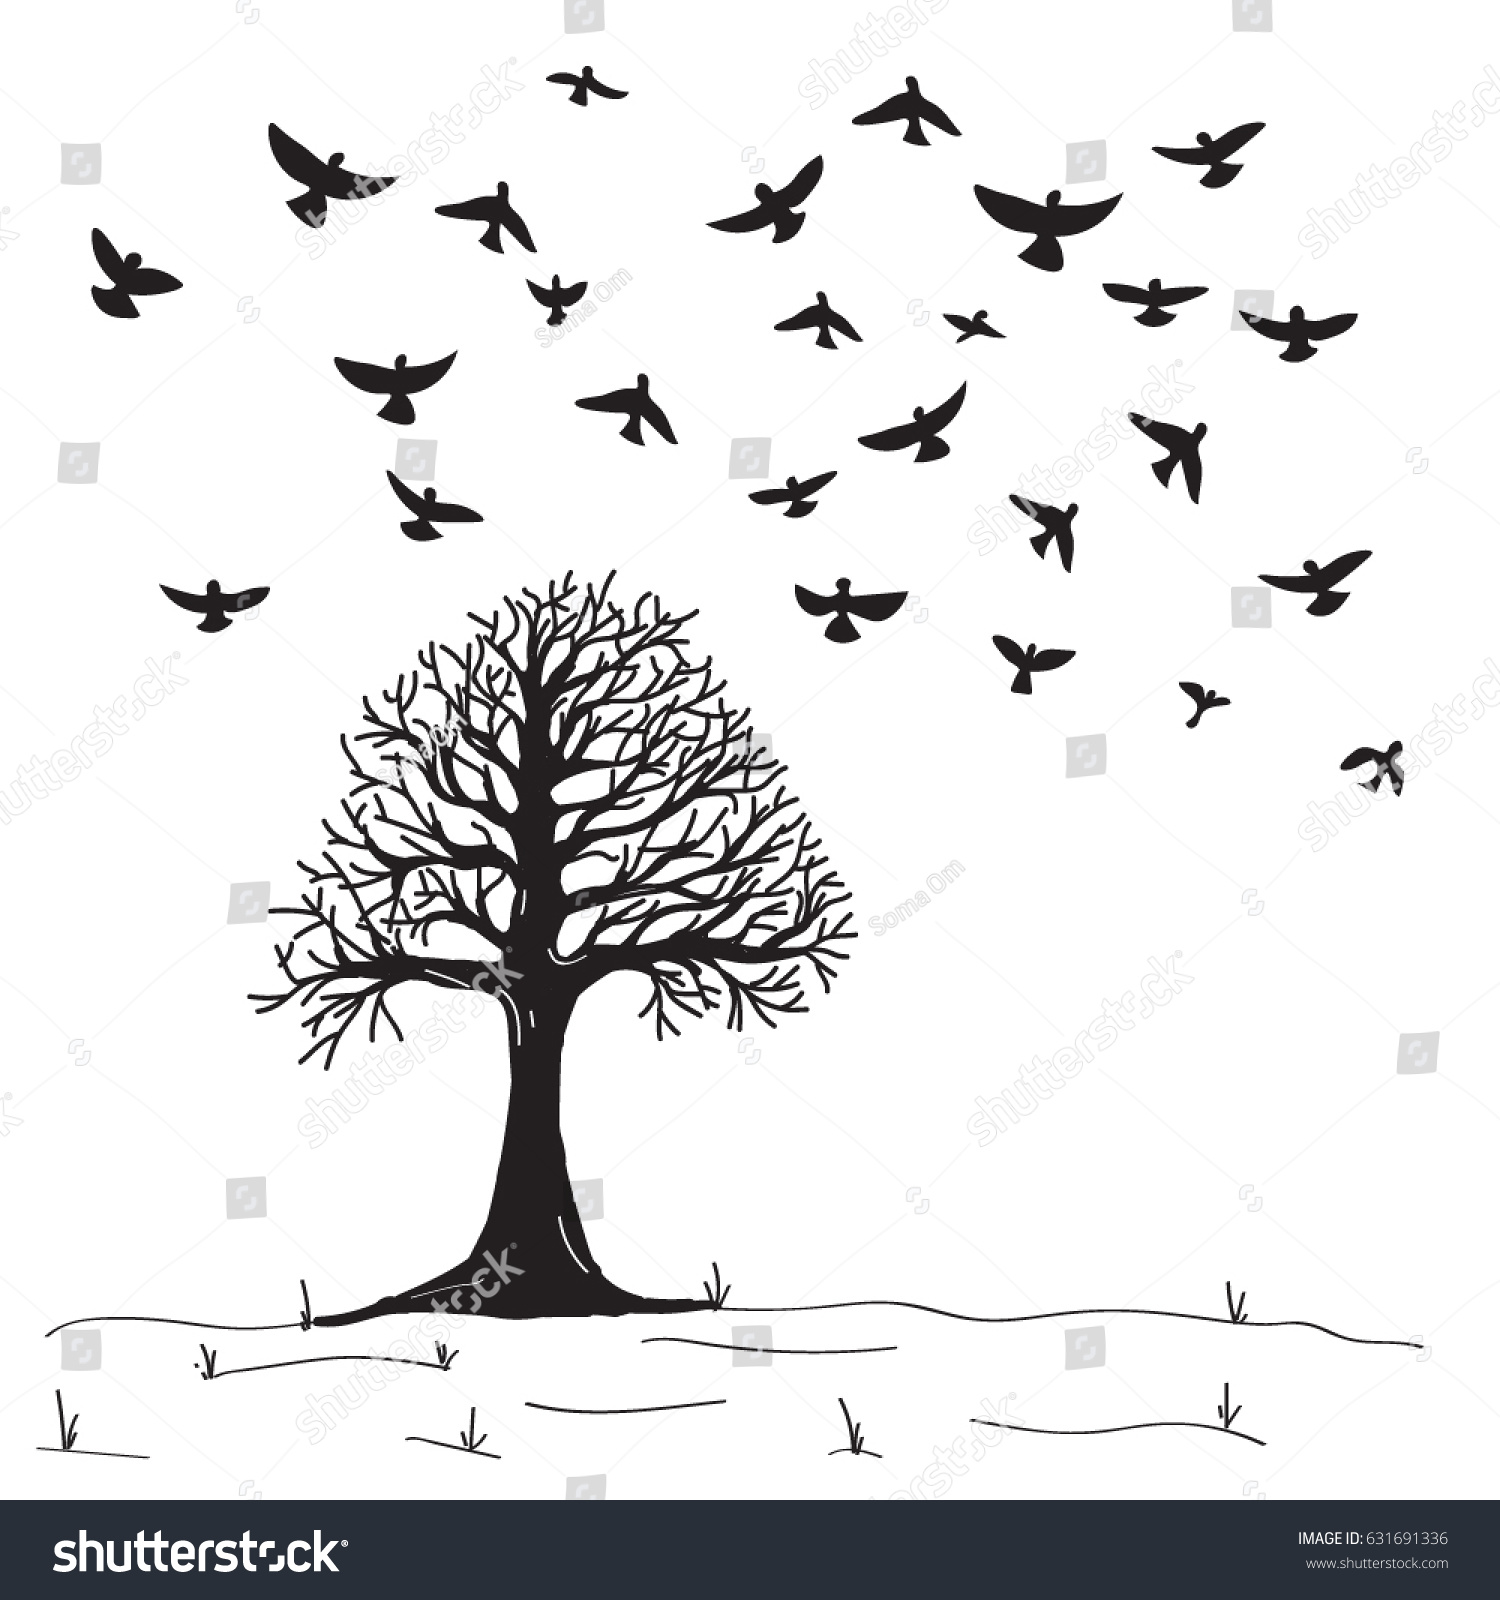 birds flying from tree silhouette